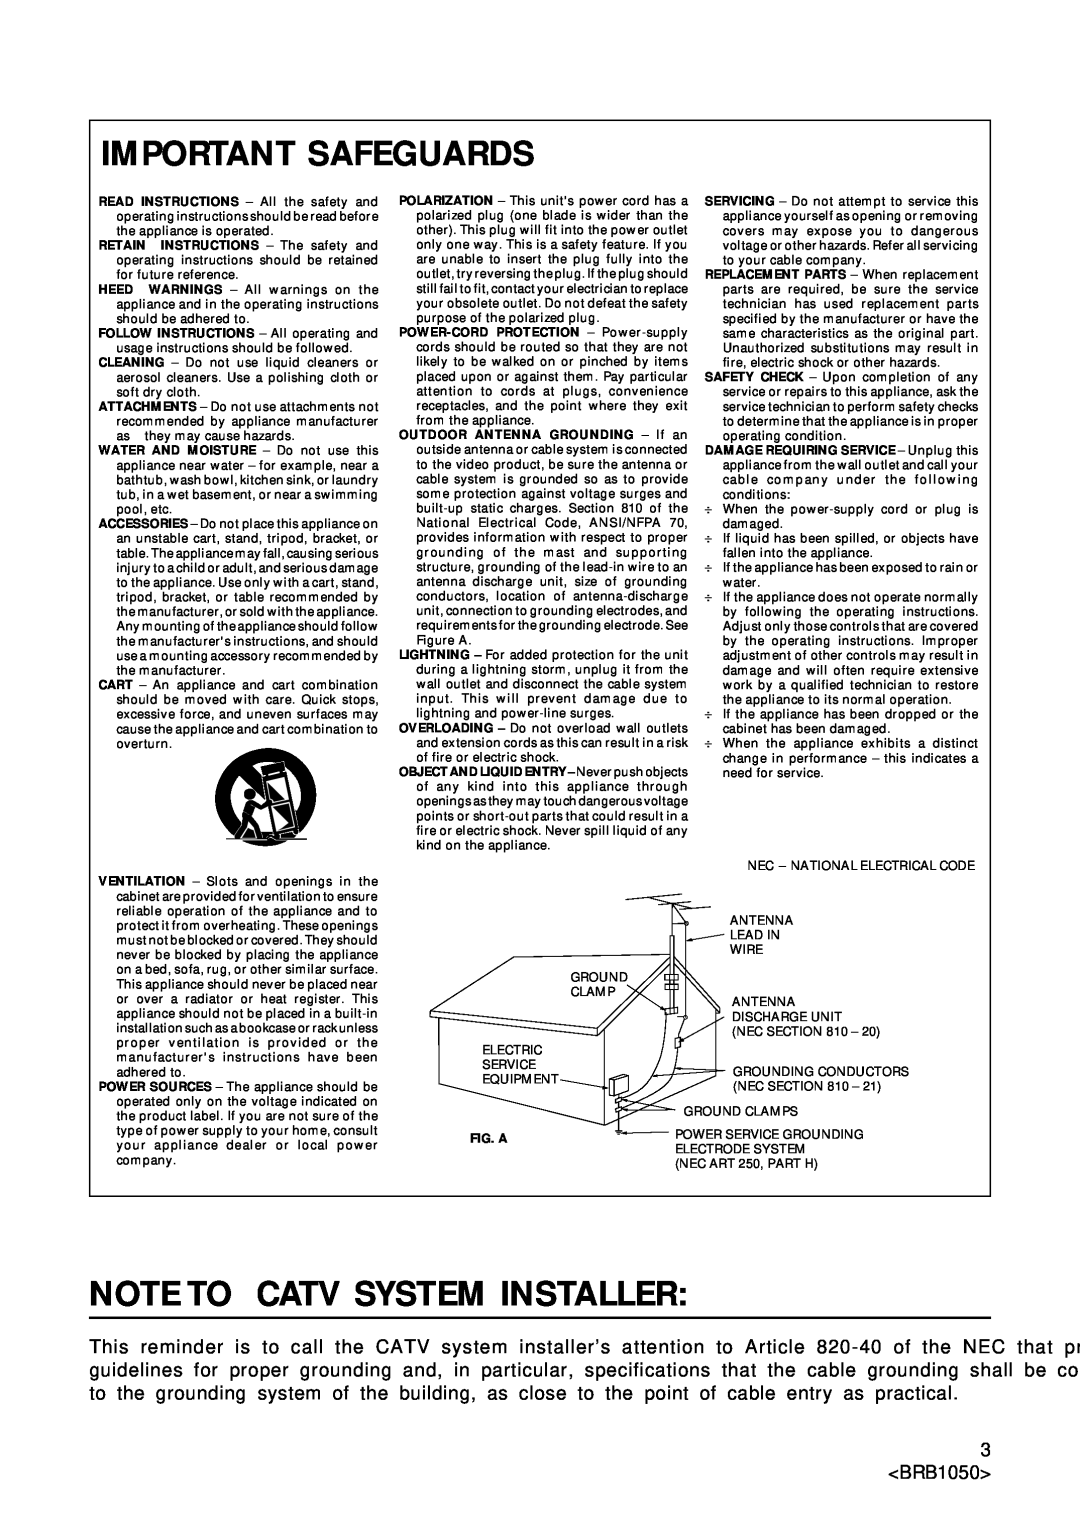 Pioneer Industrial BD-V1000 Series operating instructions Important Safeguards, Note To Catv System Installer, 3 BRB1050 